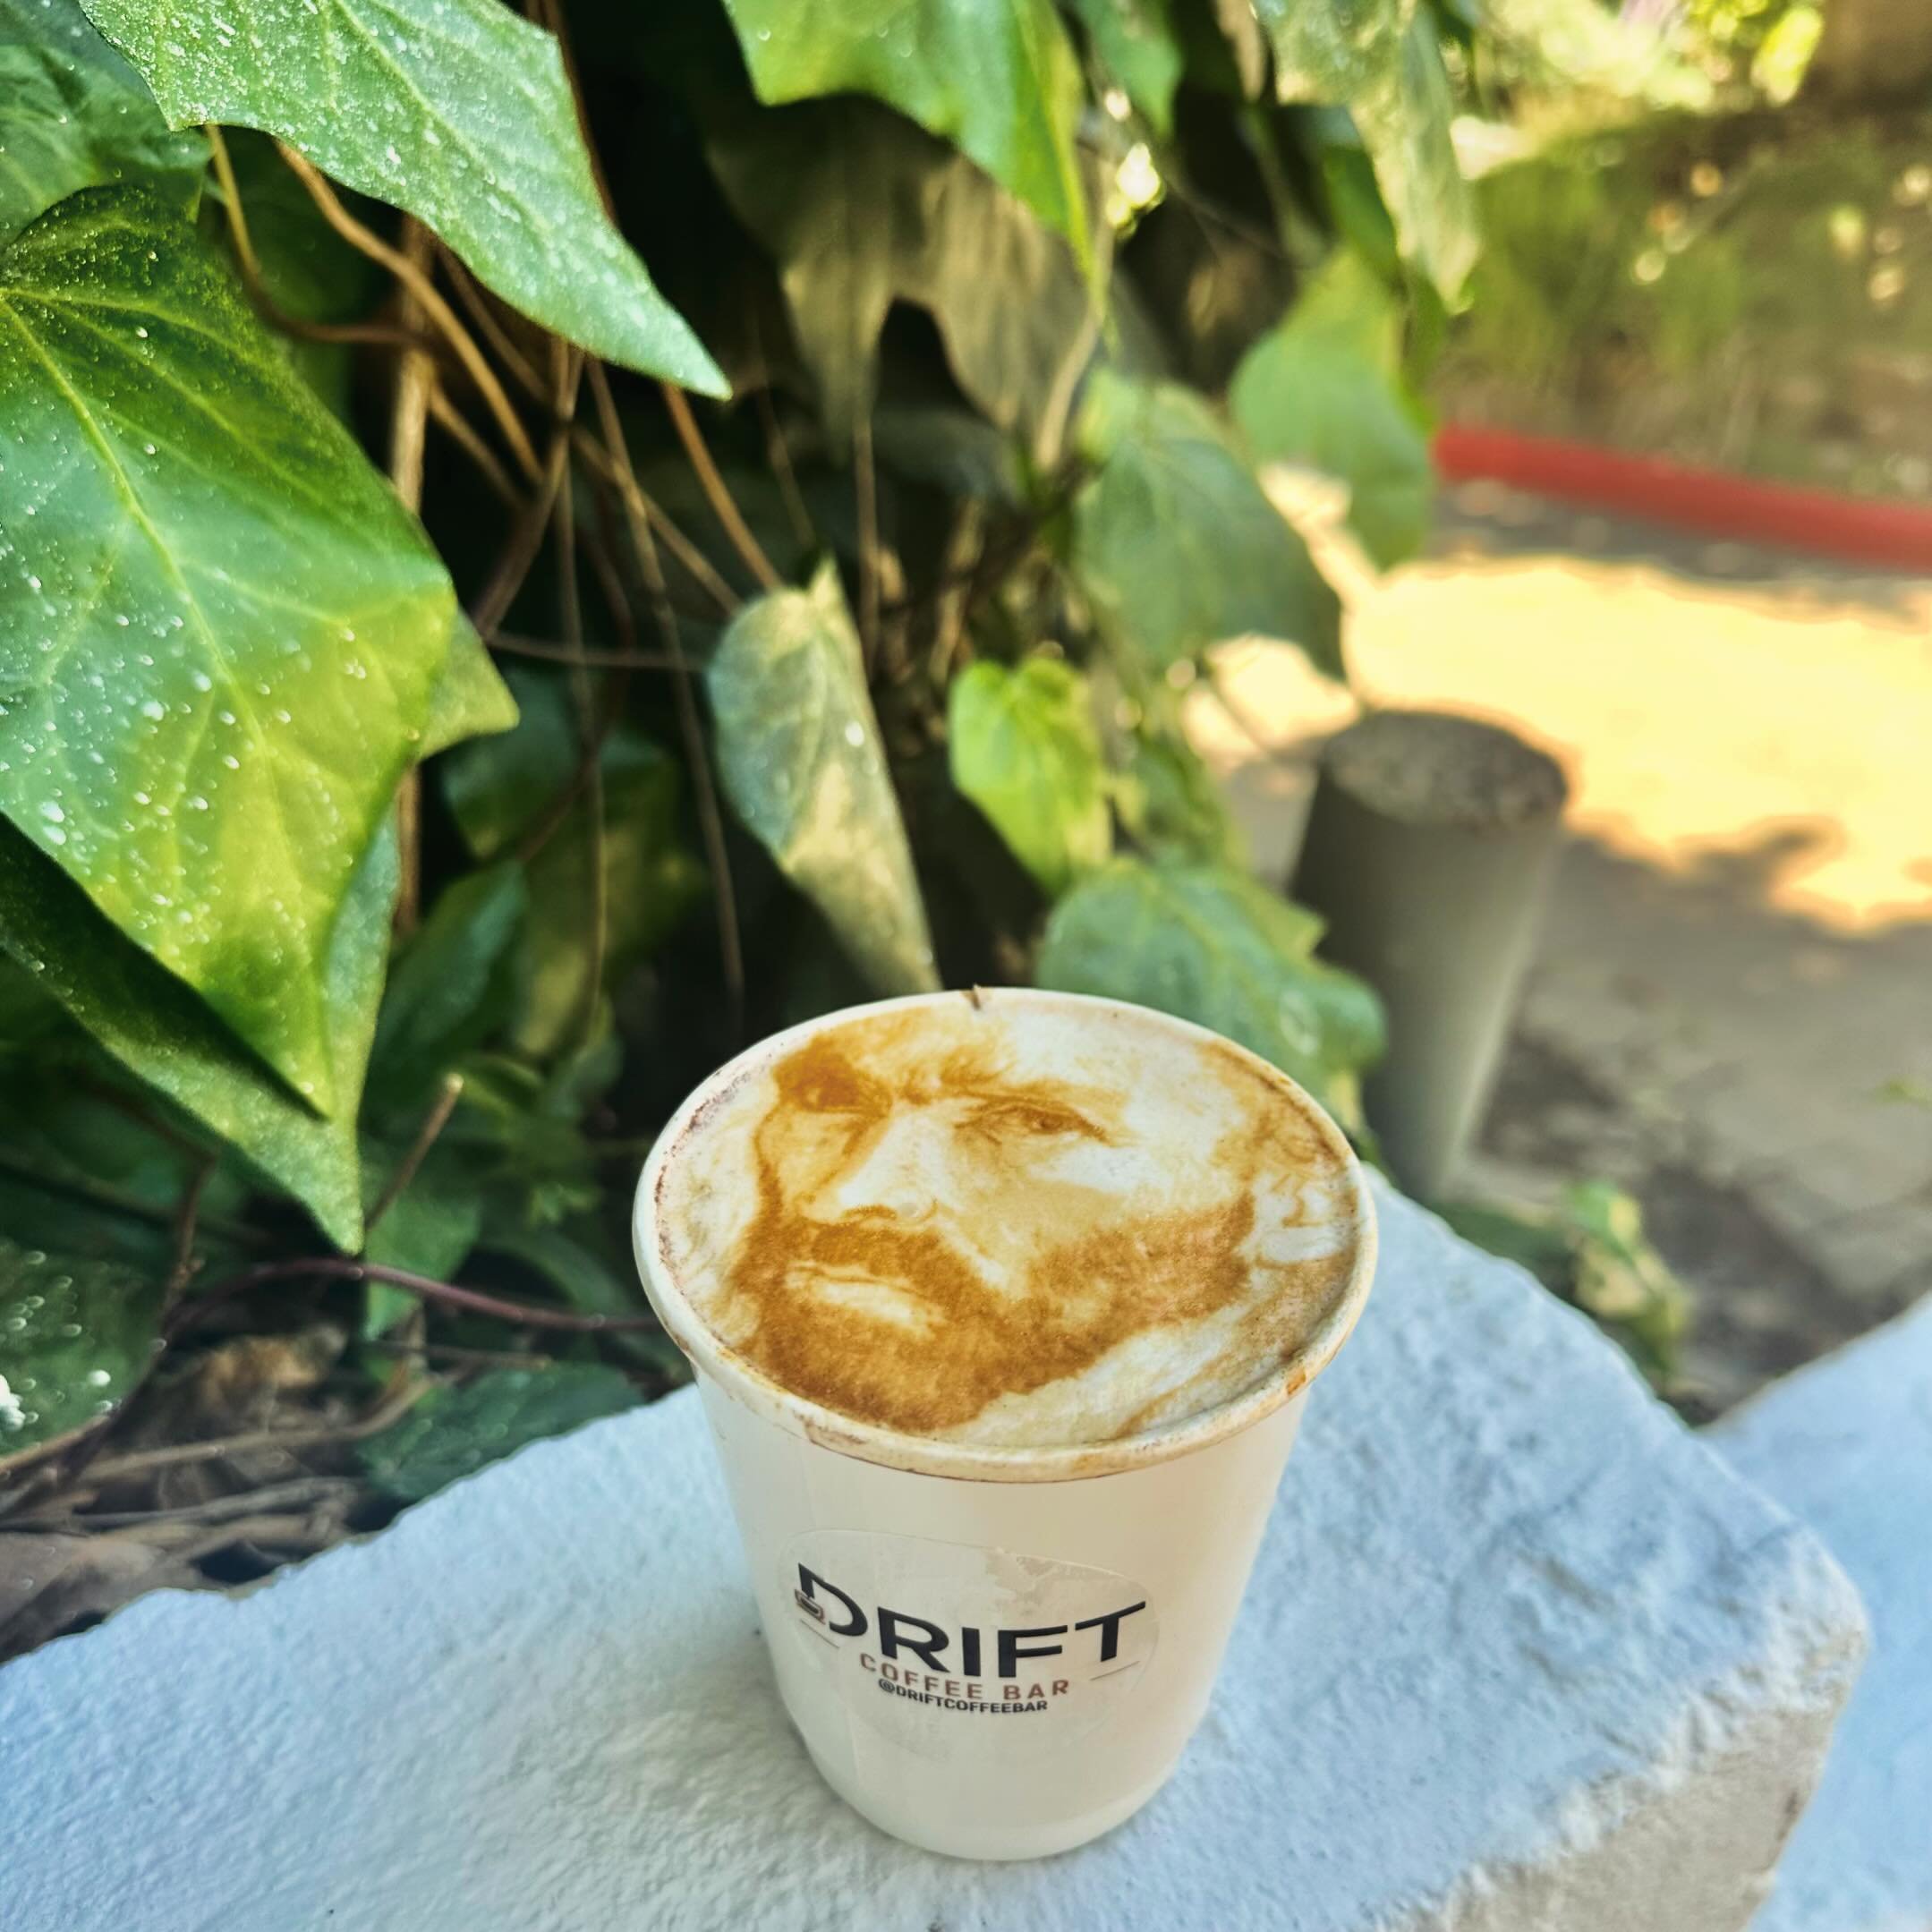 Did you know? Vincent van Gogh&rsquo;s diet consisted mainly of bread and COFFEE.
.

.

# driftcoffeebar #coffeecatering #espressocart #coffeecart #mobilecoffee #coffeecateringbusiness #coffeecateringlosangeles #coffeebaronsite&nbsp;#mobilecoffeebar 